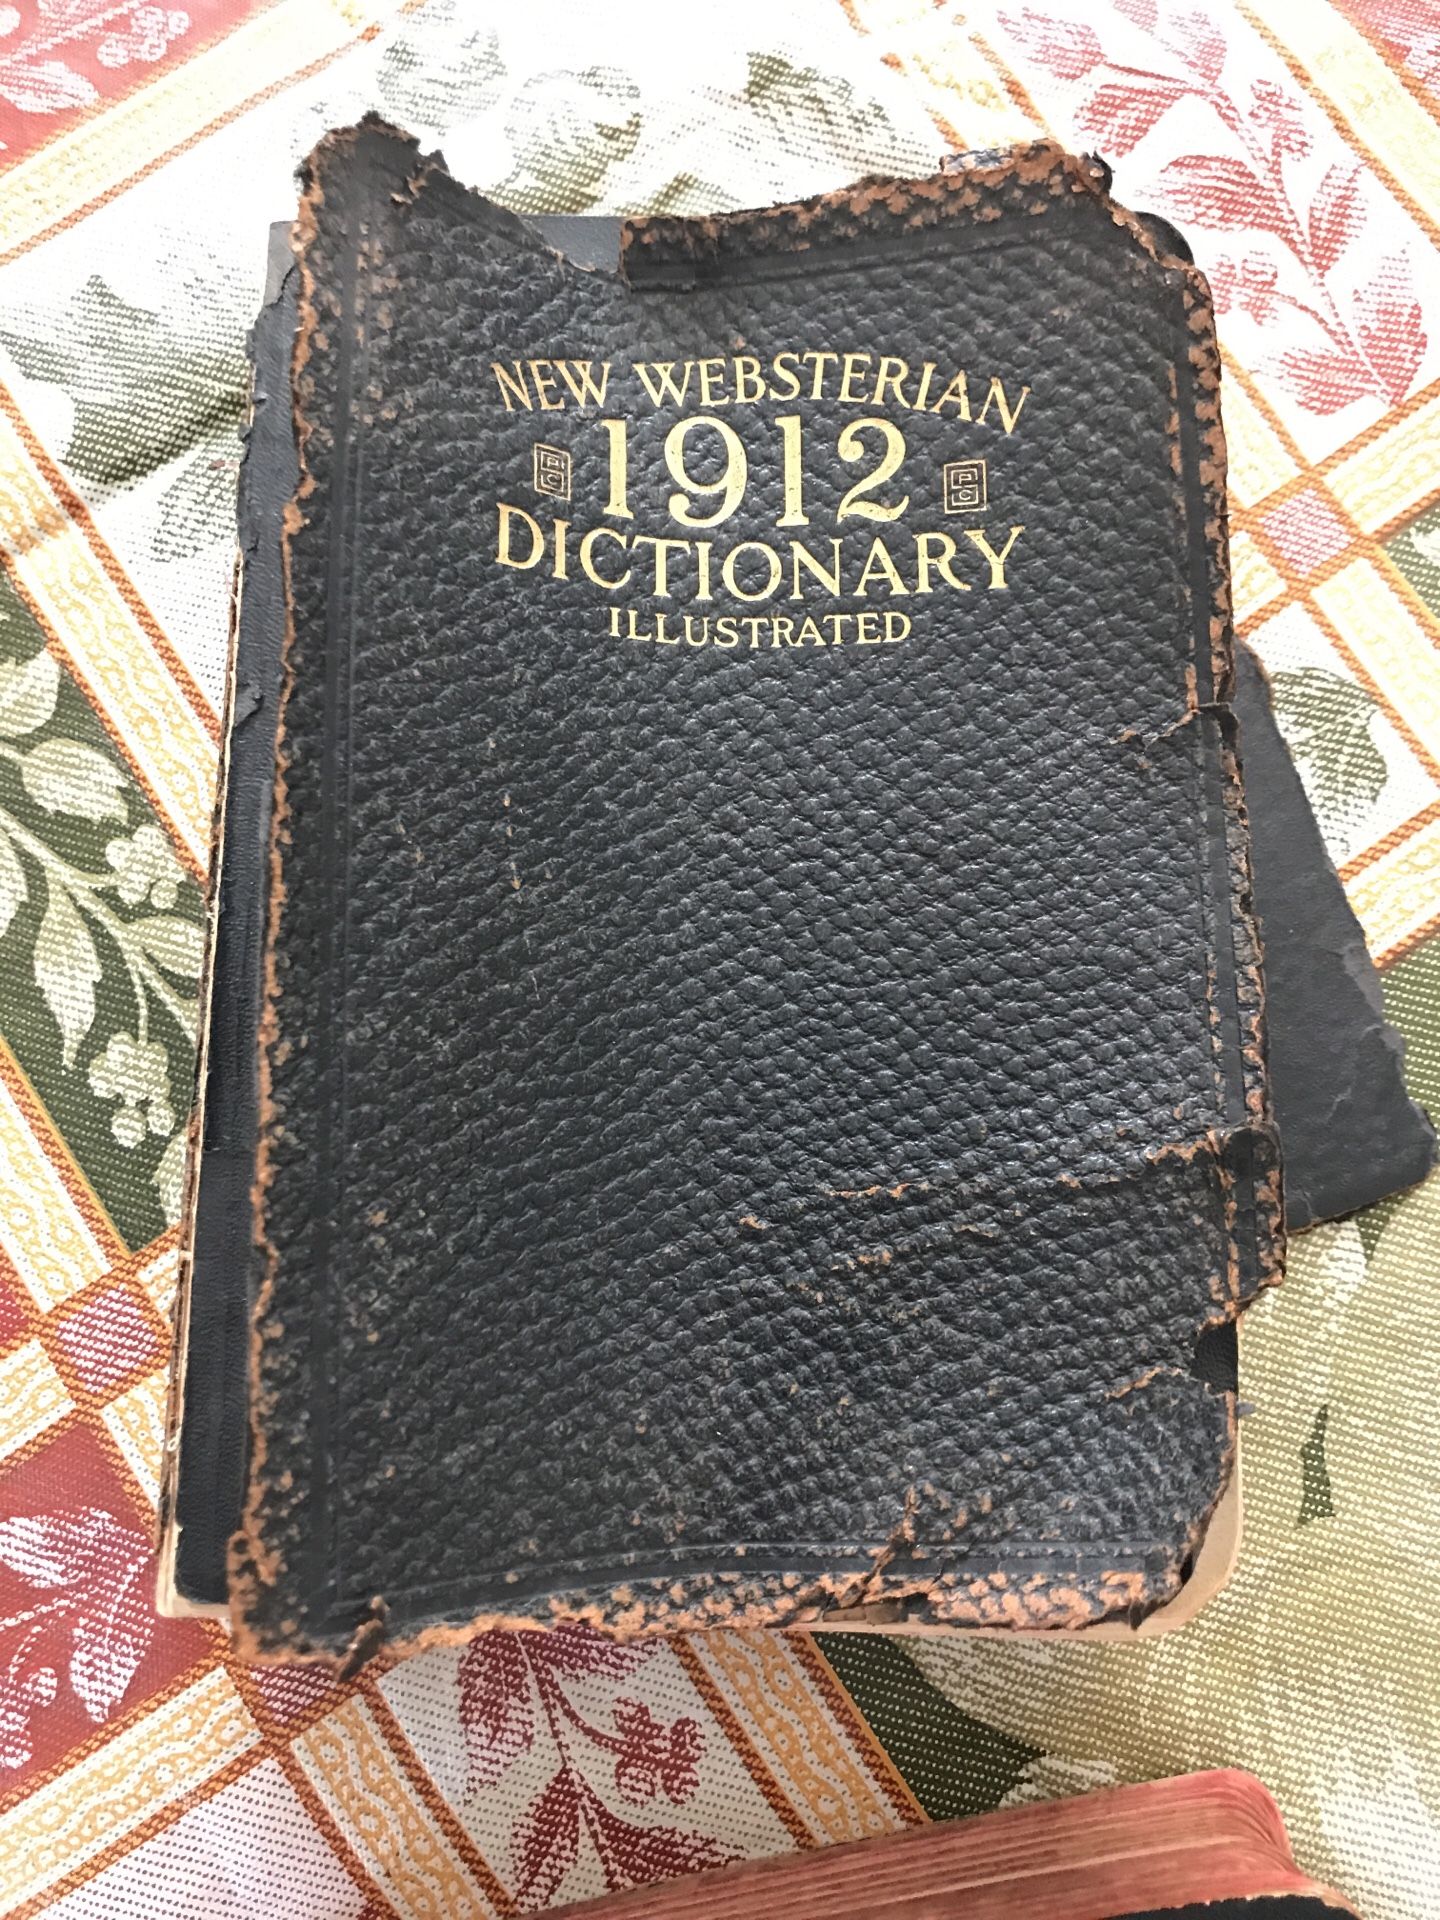 New Websterian 1912 Dictionary Illustrated